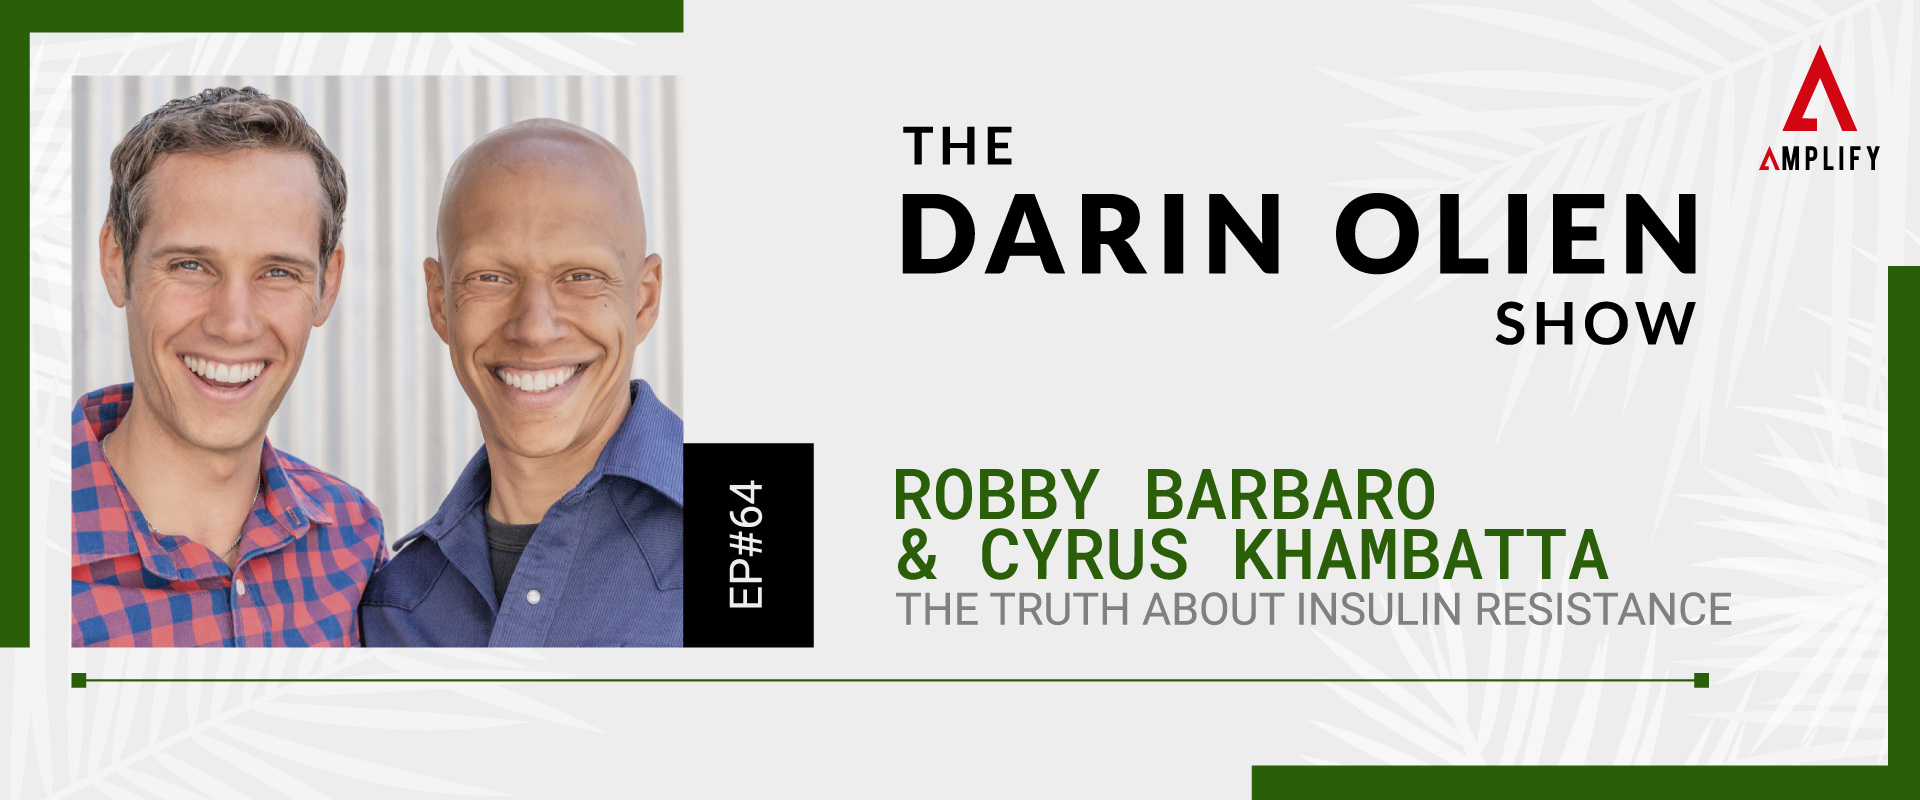 Title: Robby Barbaro & Cyrus Khambatta on The Truth About Insulin Resistance